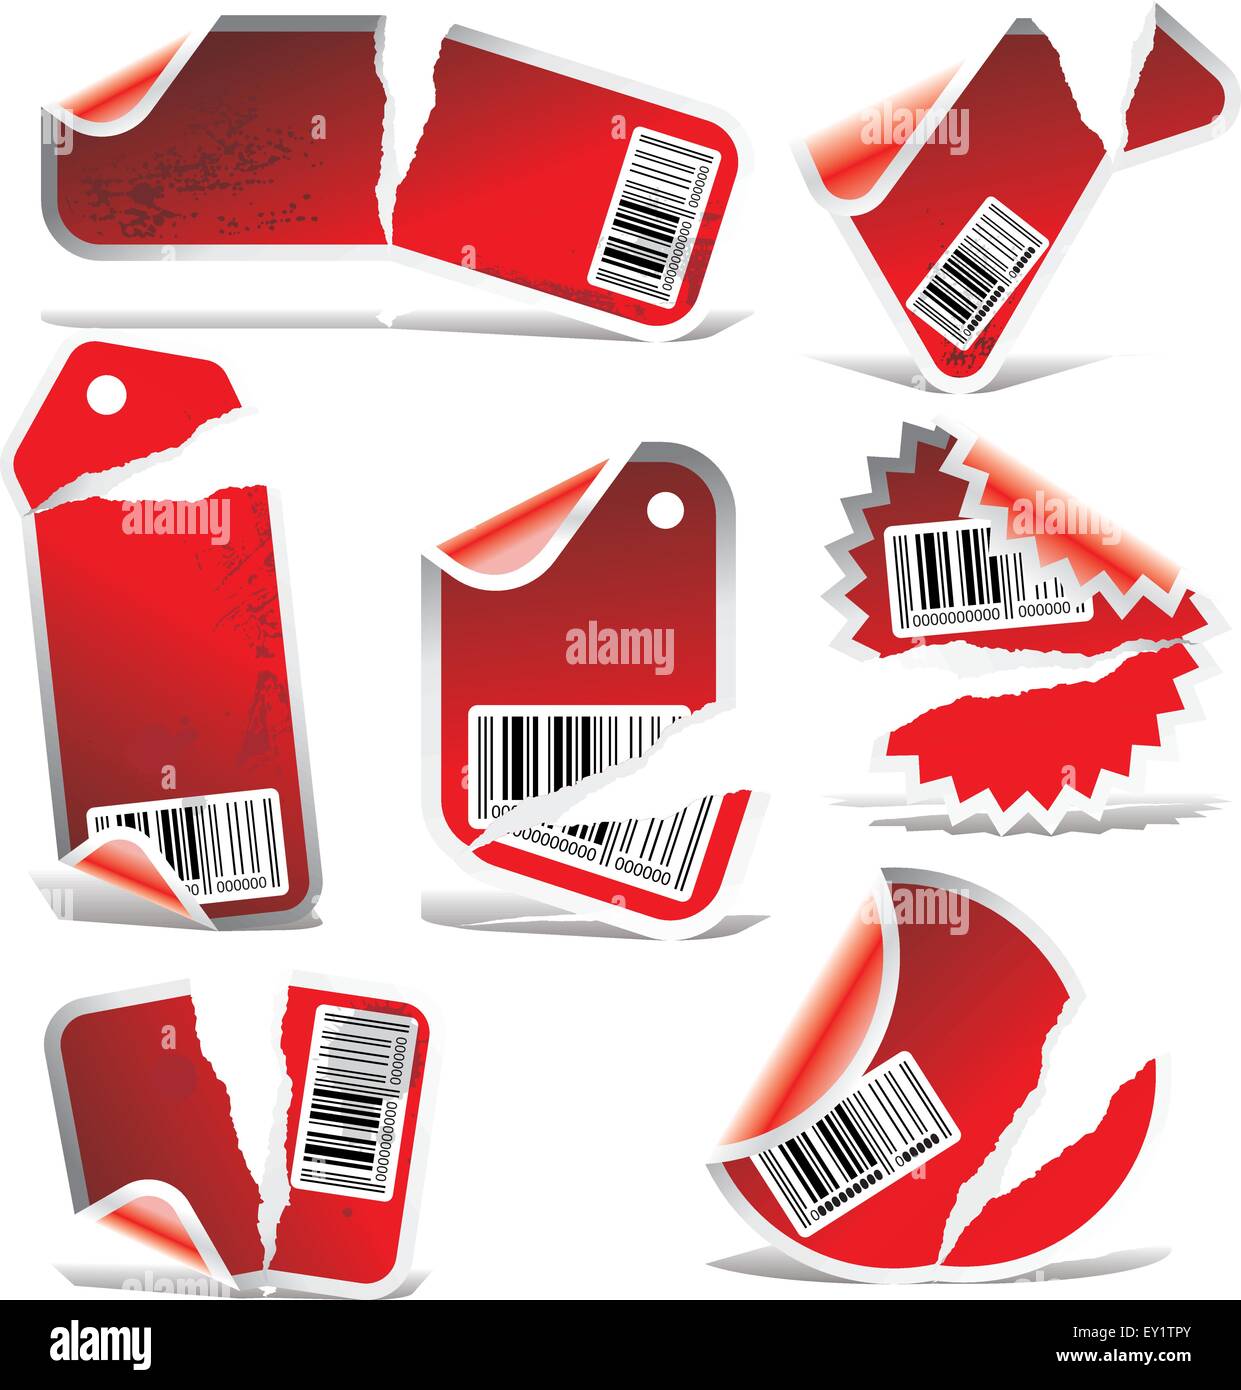 red ripped tag and sticker set with bar codes - vector illustration Stock Vector